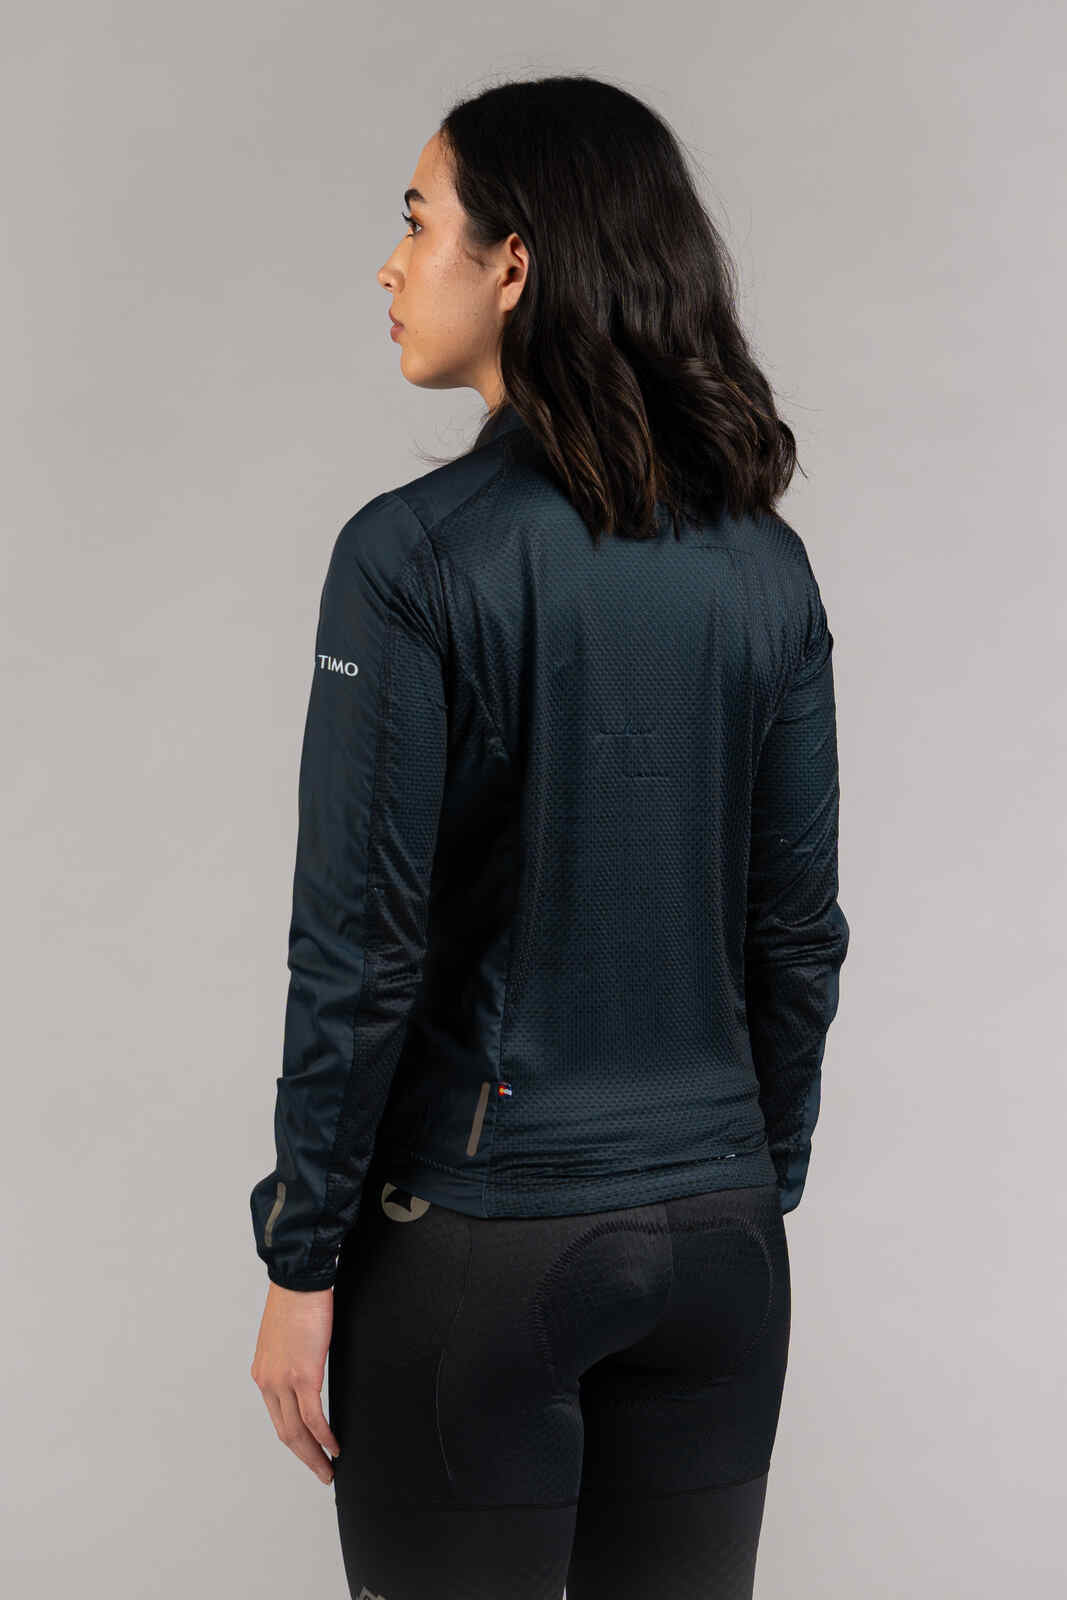 Women's Navy Blue Packable Cycling Wind Jacket - Back View